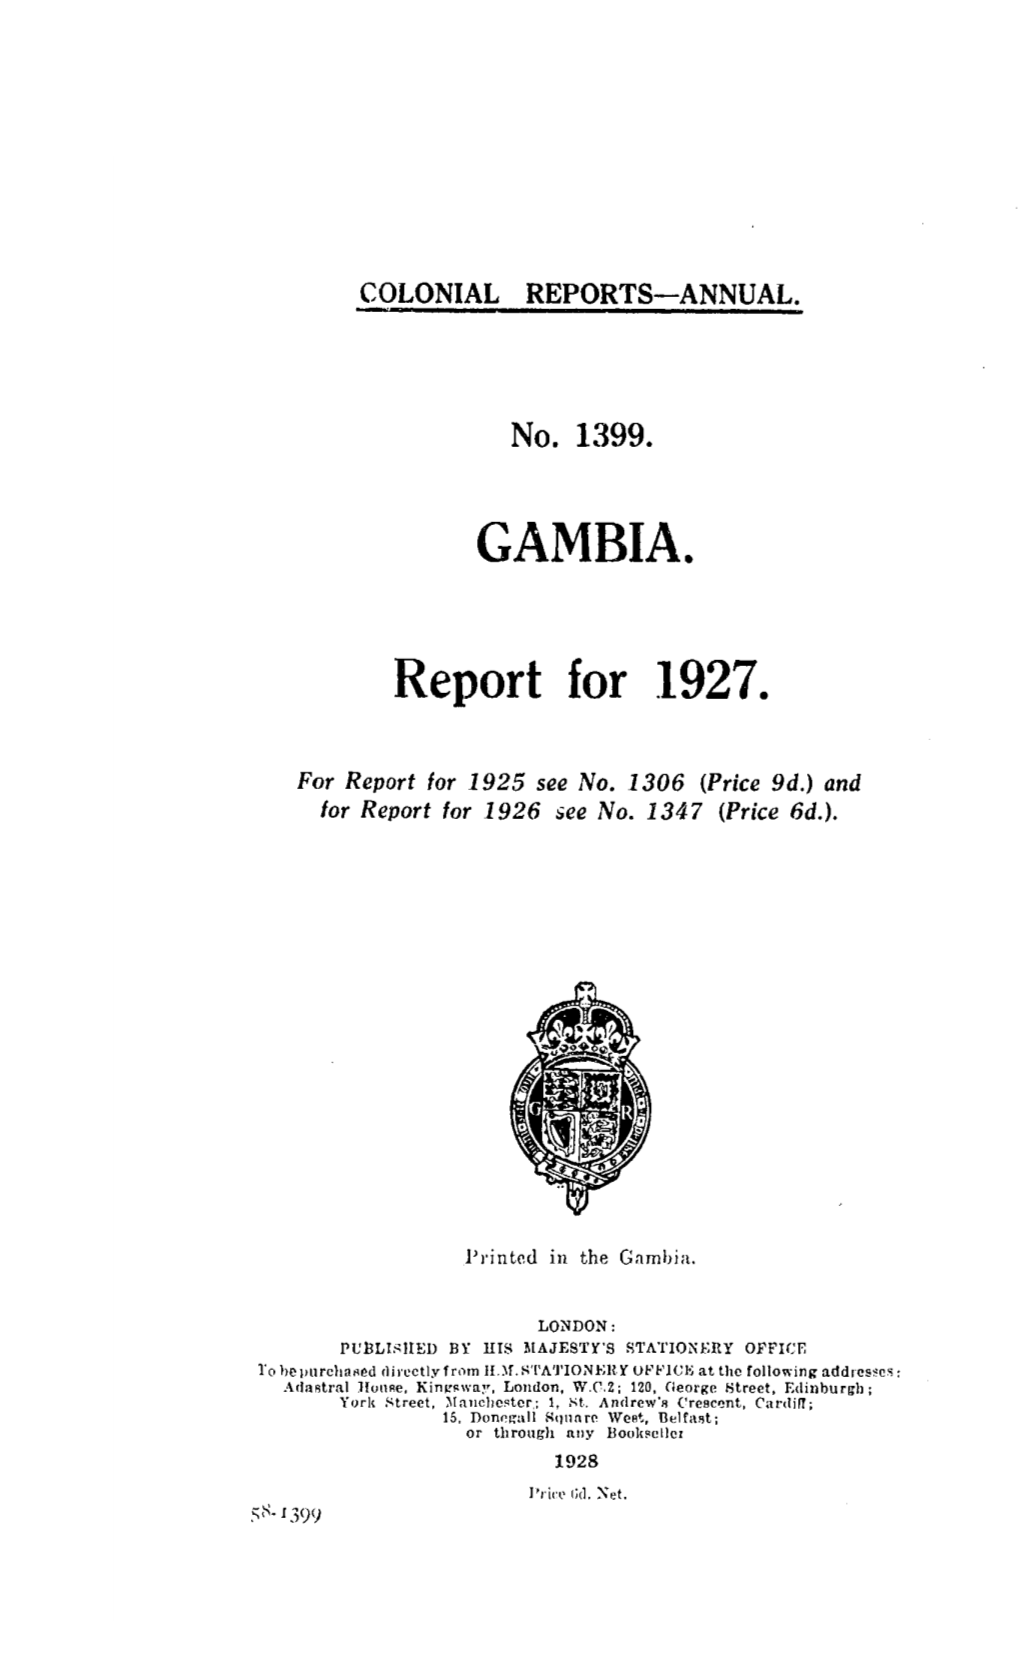 Annual Report of the Colonies. Gambia 1927